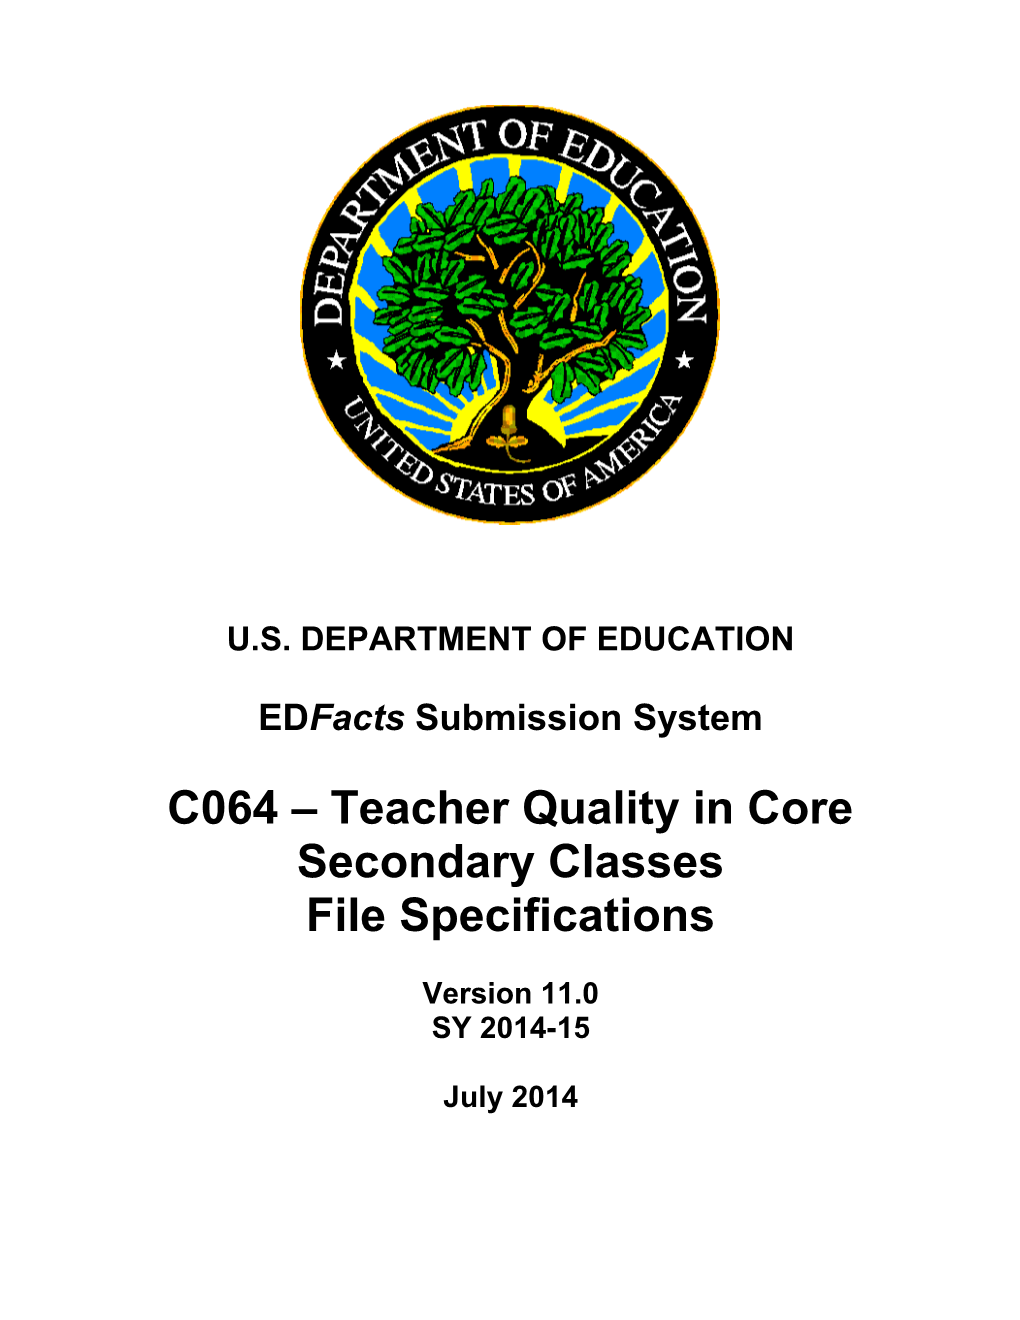 Teacher Quality in Core Secondary Classes File Specifications